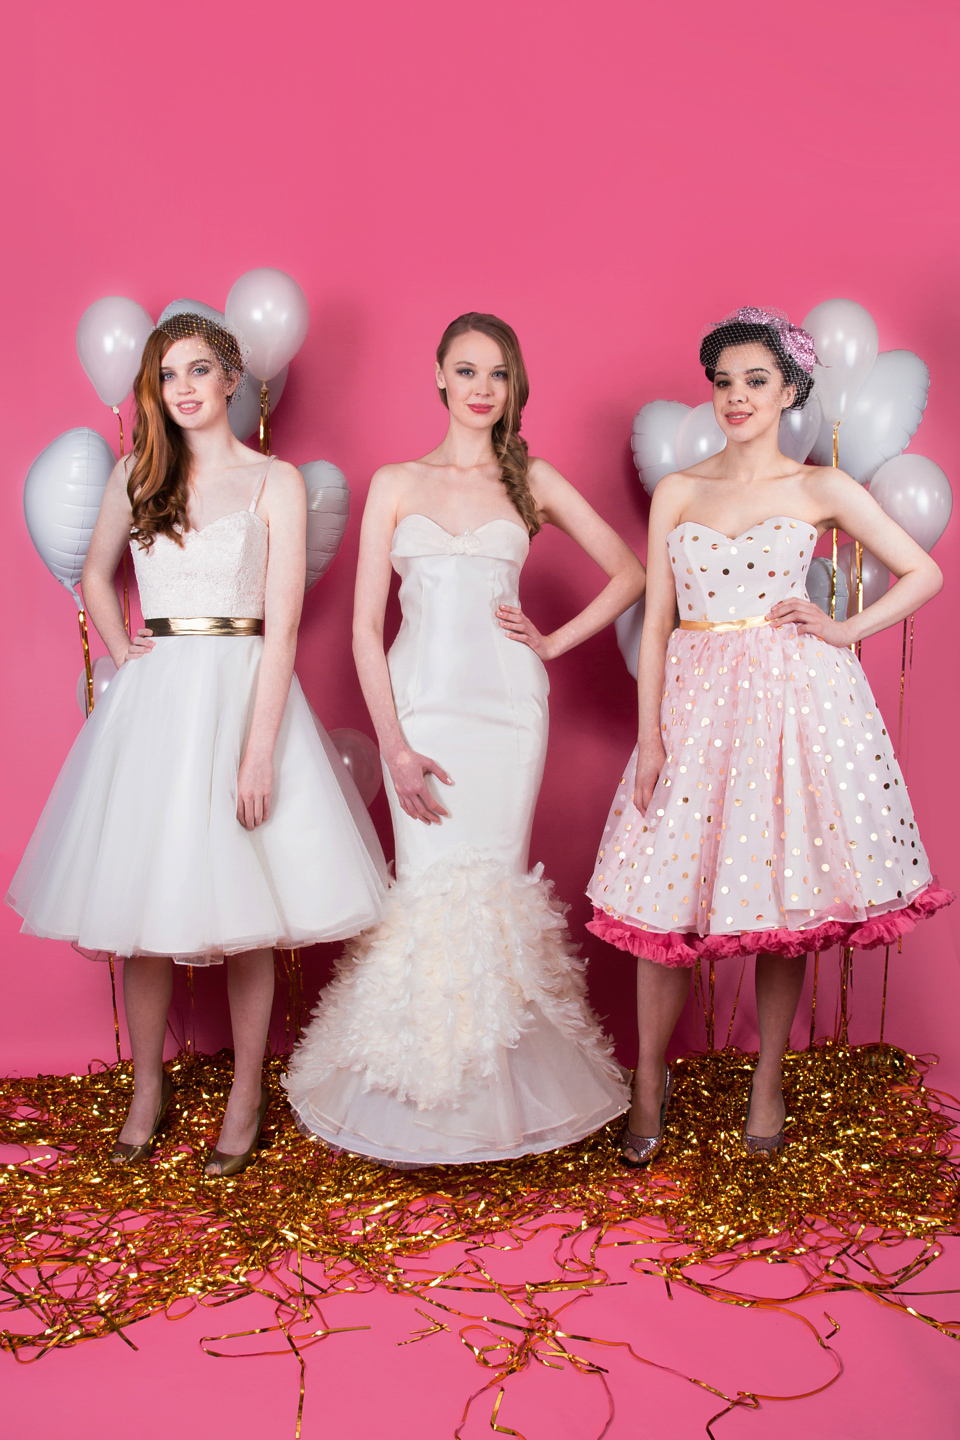 Oh My! The New 1950s Inspired Bridal Collection From Oh My Honey.